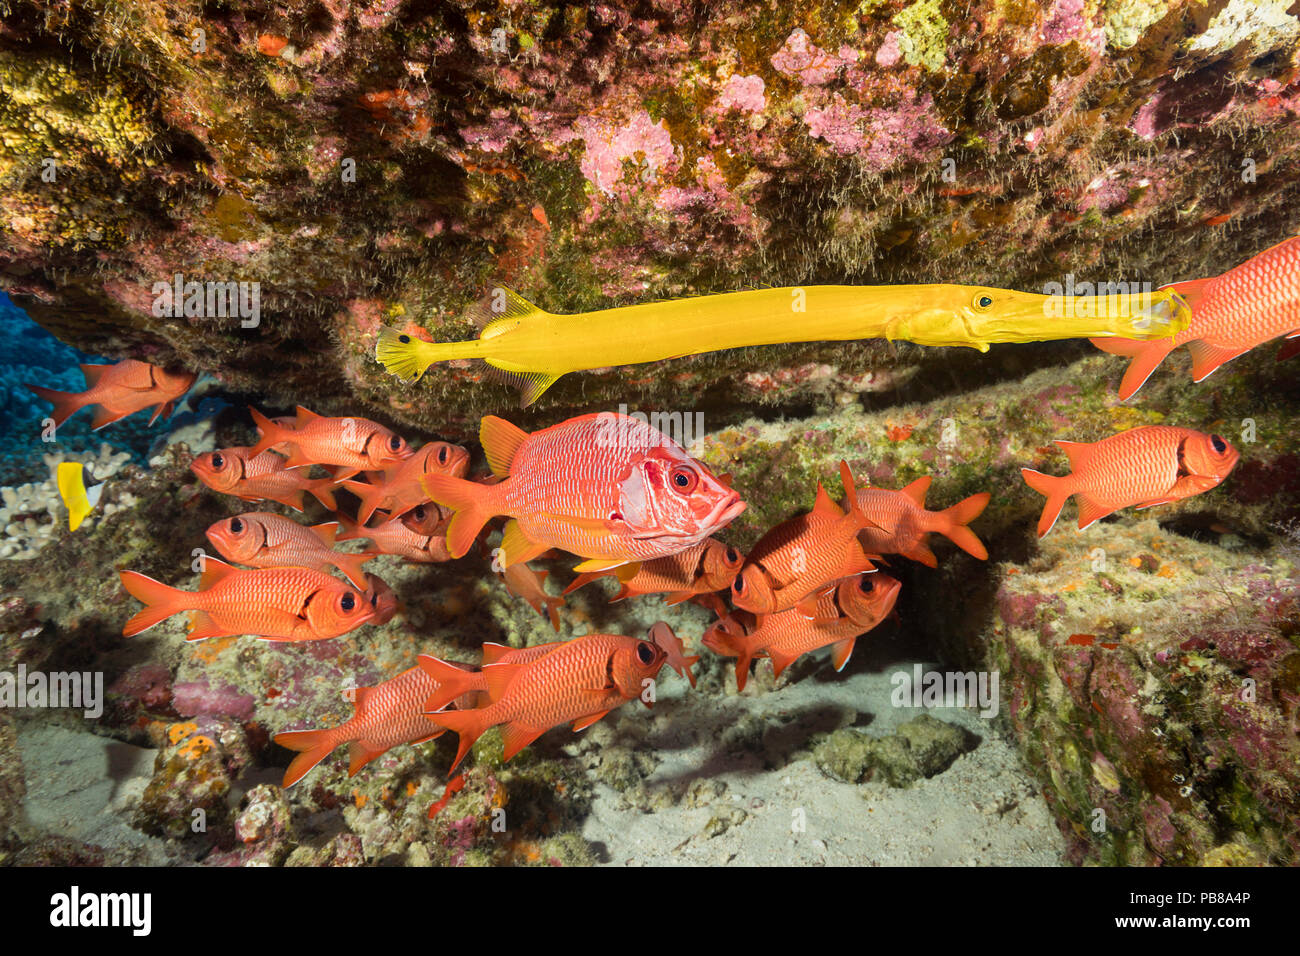 Hawaiian reef fish incuding a yellow trumpetfish, Aulostomus chinensis, longjaw squirrelfish, Sargocentron spiniferum, and a school of bigscale soldie Stock Photo